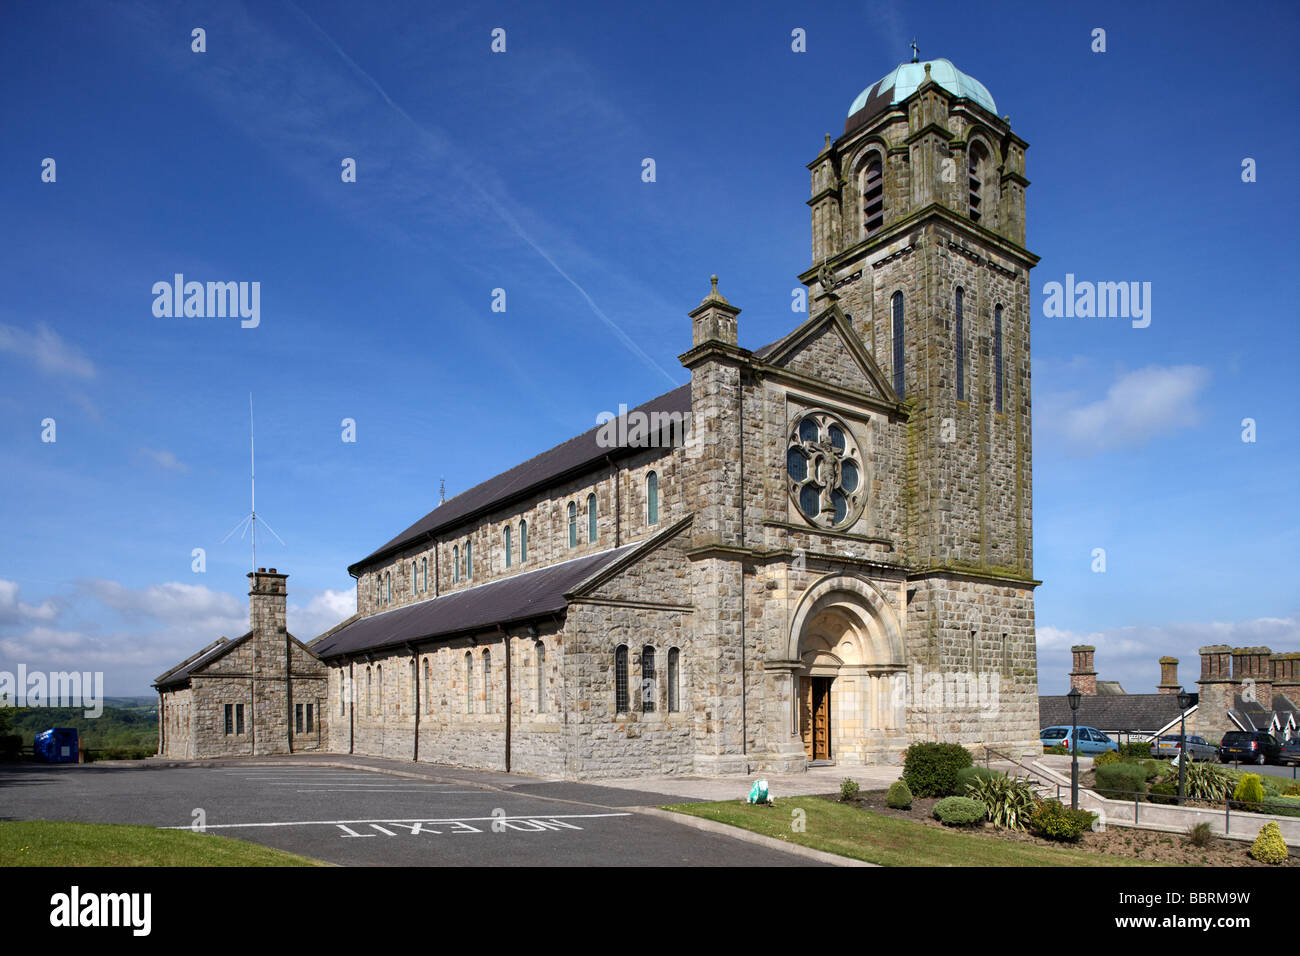 Roman Catholic Church of St Mary in Aughnacloy with its unusual tall tower and cupola roof county tyrone northern ireland uk st marys aughnacloy Stock Photo